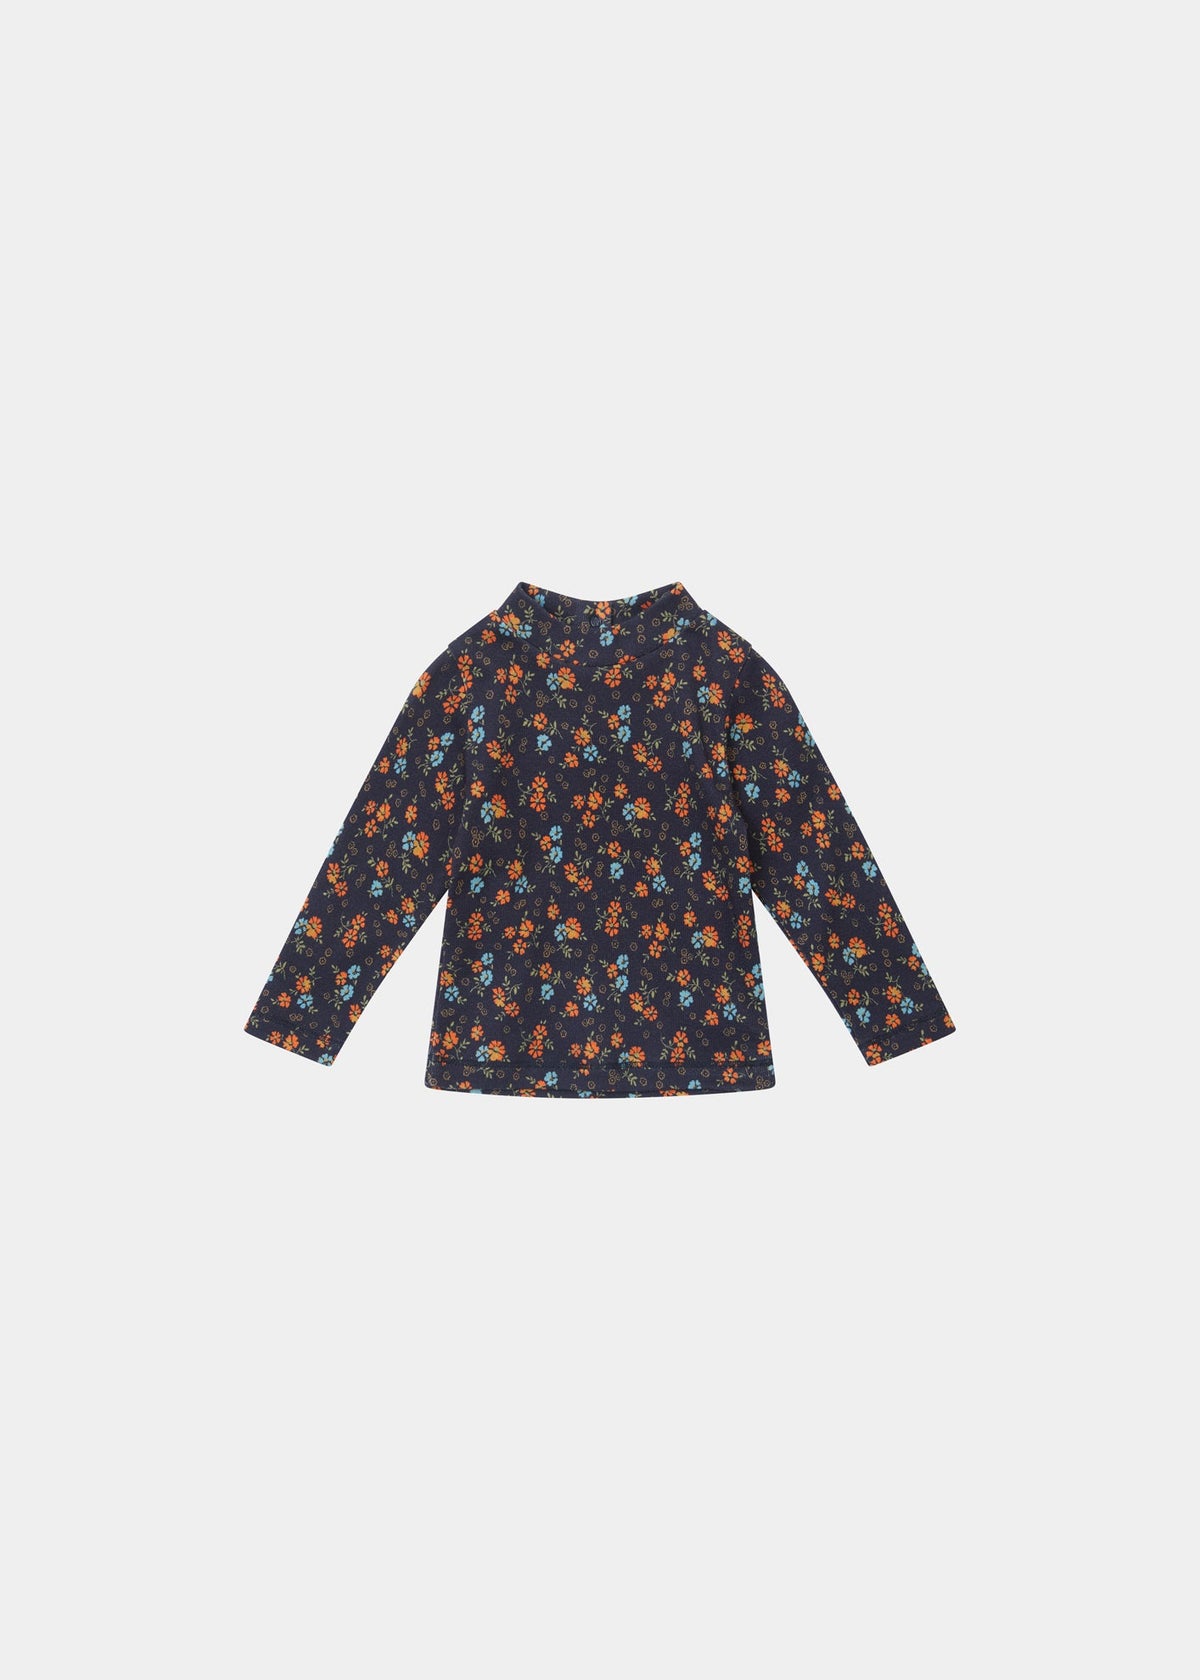 FORGO BABY T-SHIRT - NAVY DITSY FLORAL